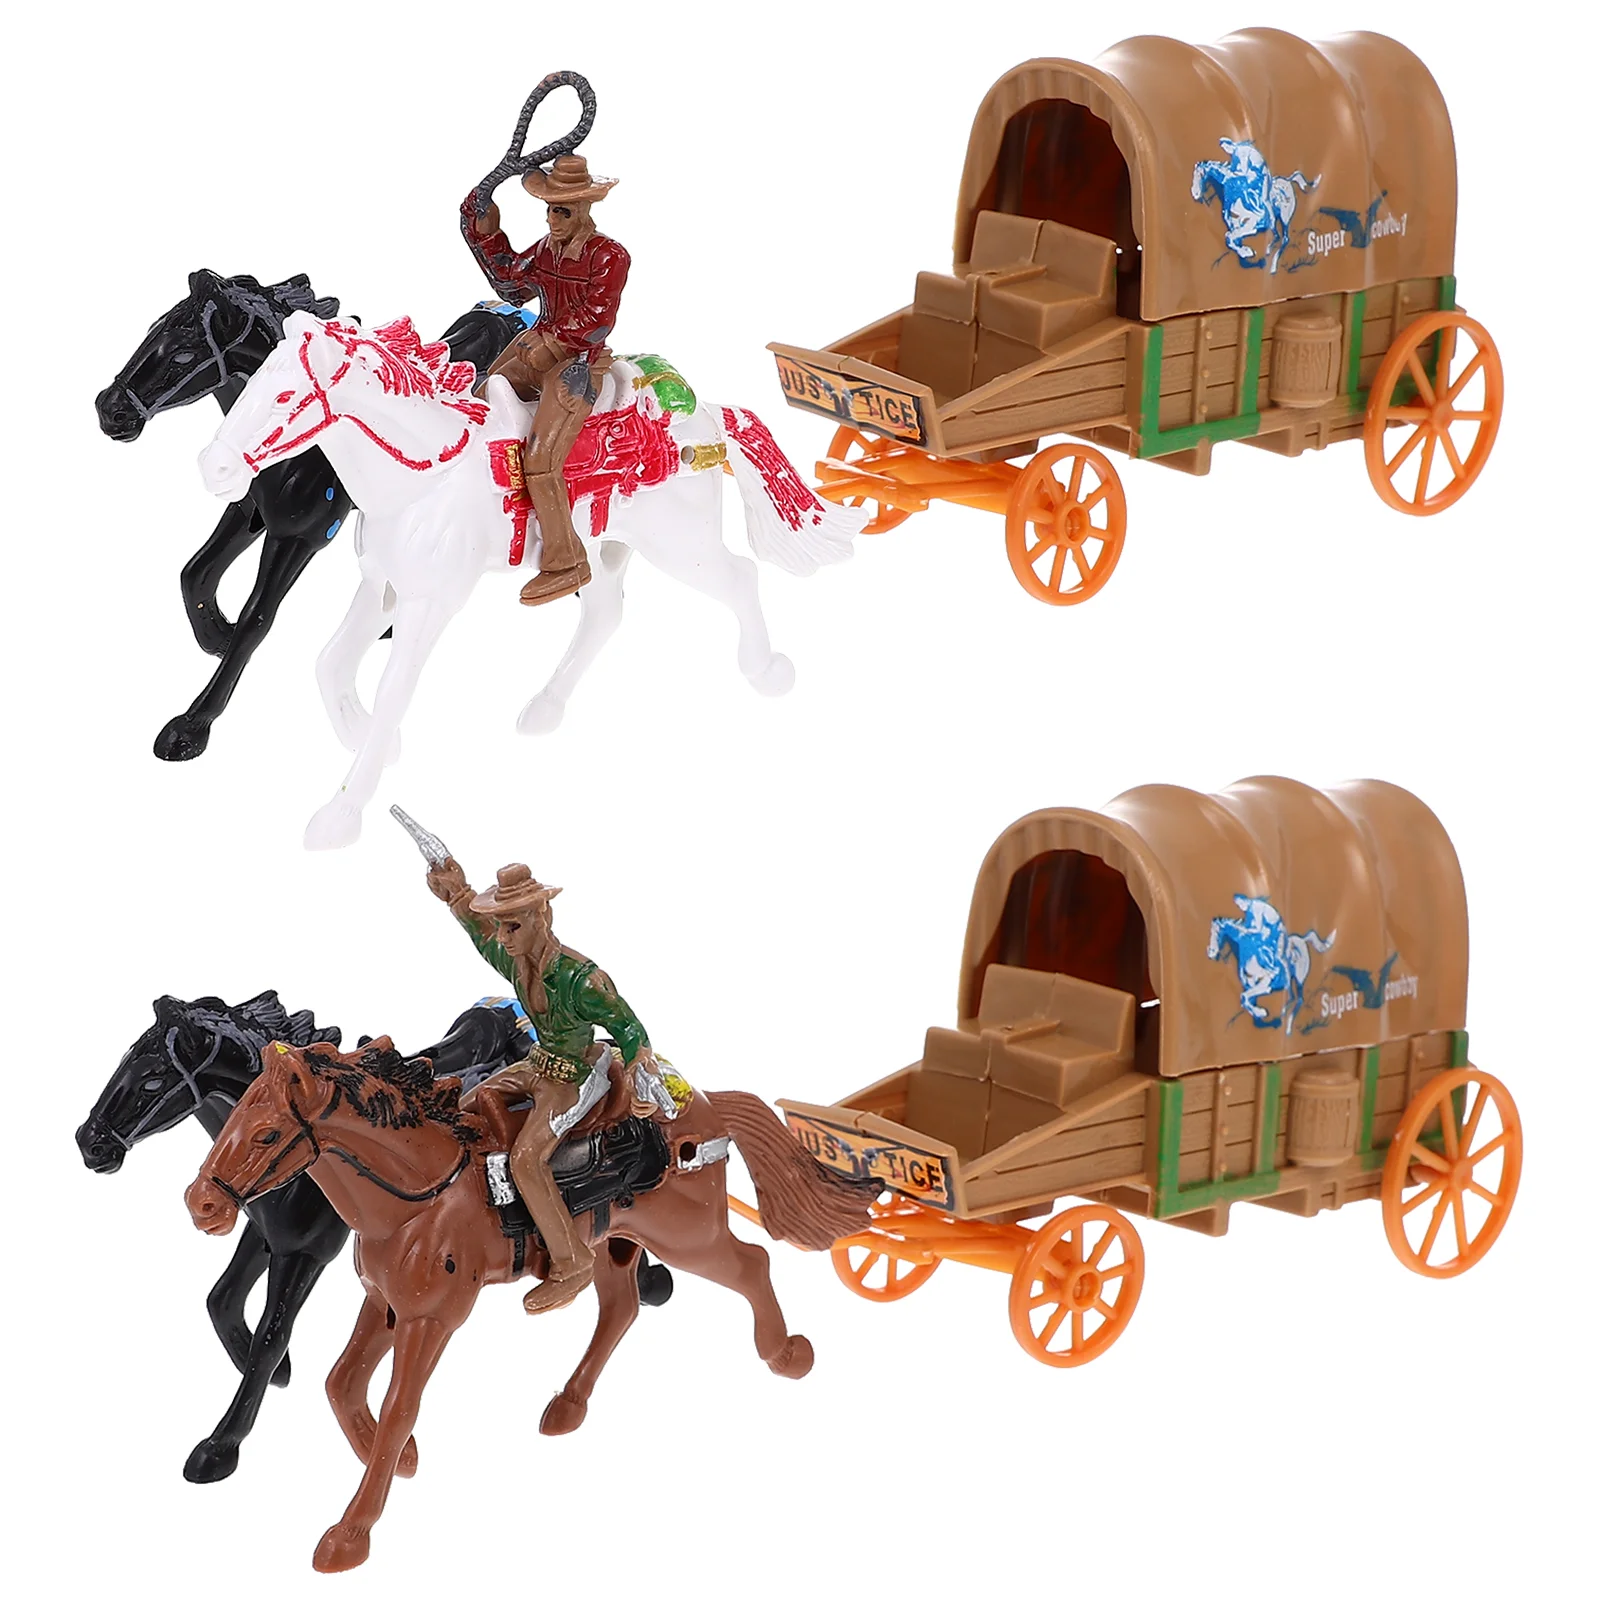 

Cowboy Toys Carriage Horse Toy West Figures Worlds Smallest Cowboys Models Playset Western Figurine Riding Model Wild Plastic